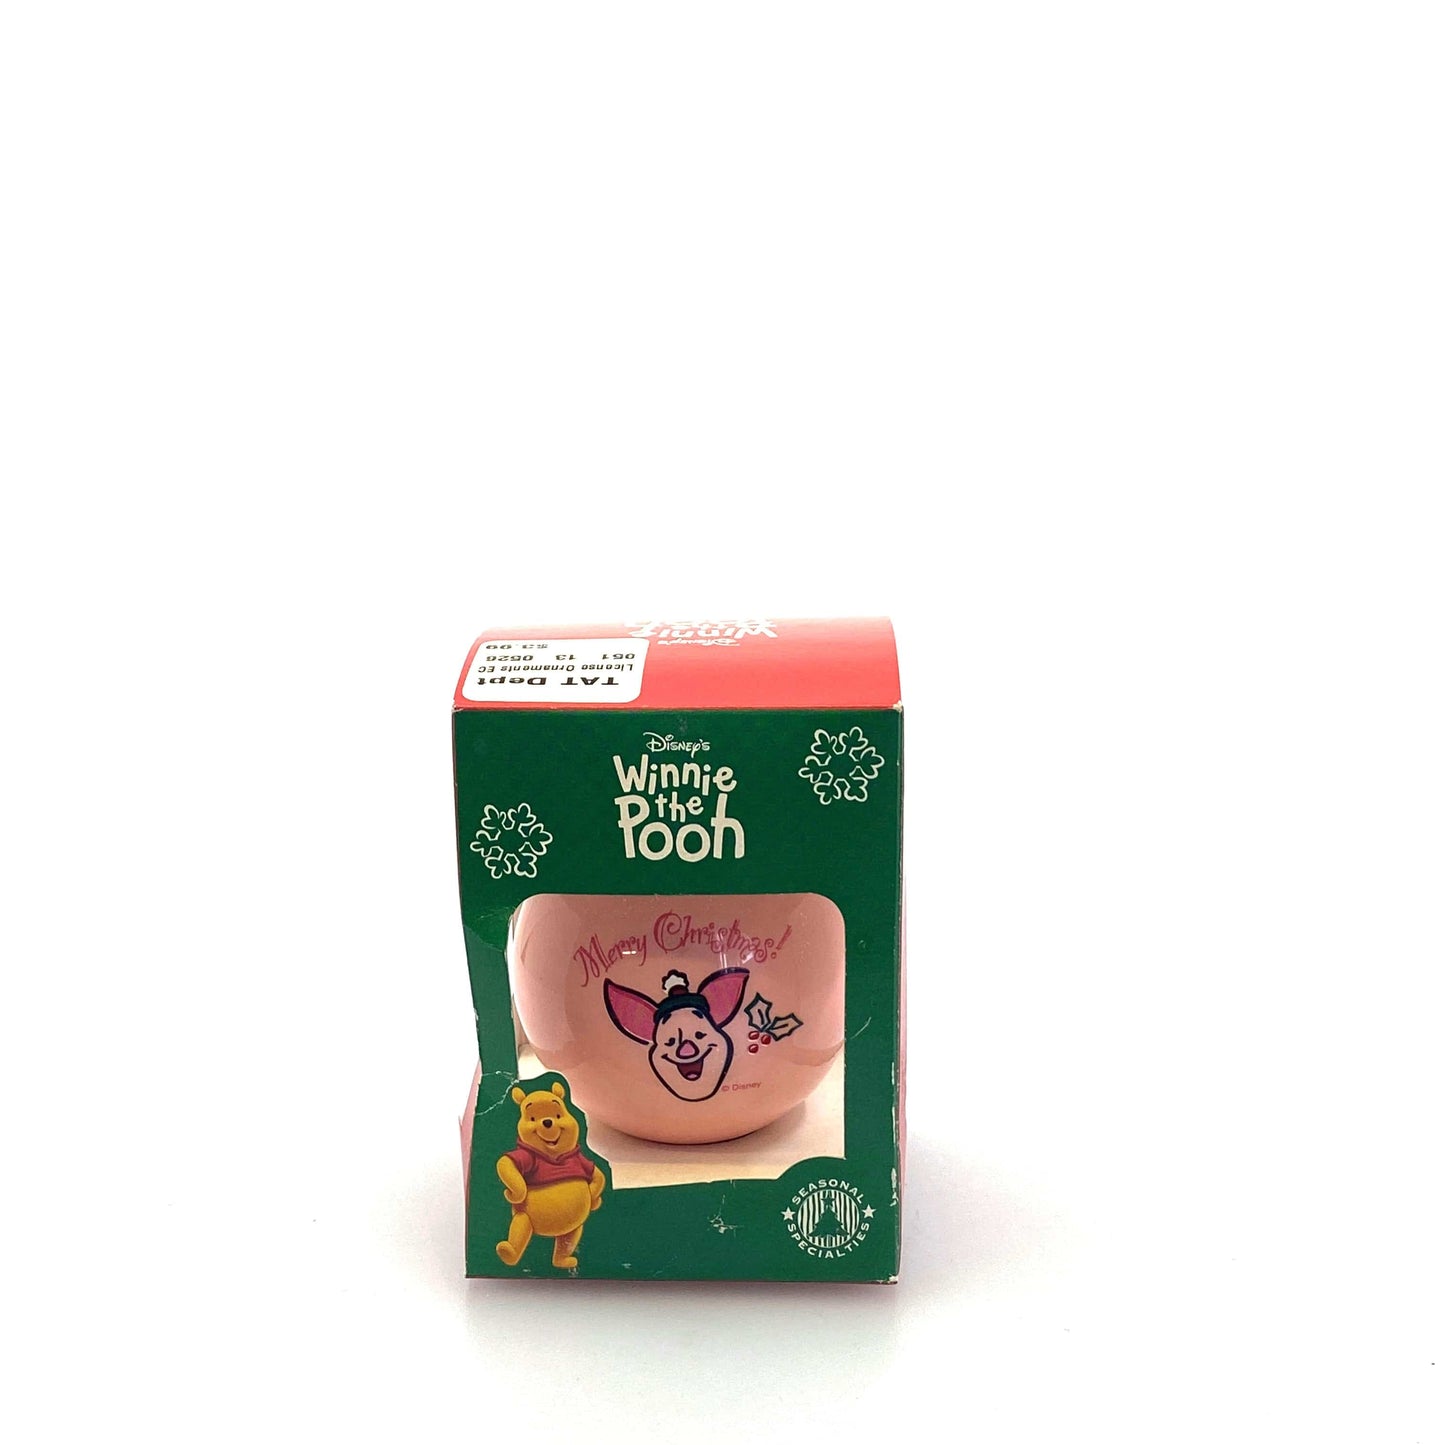 Seasonal Specialties Winne the Pooh “Piglet - Merry Christmas” Holiday Ornament Pink Ball